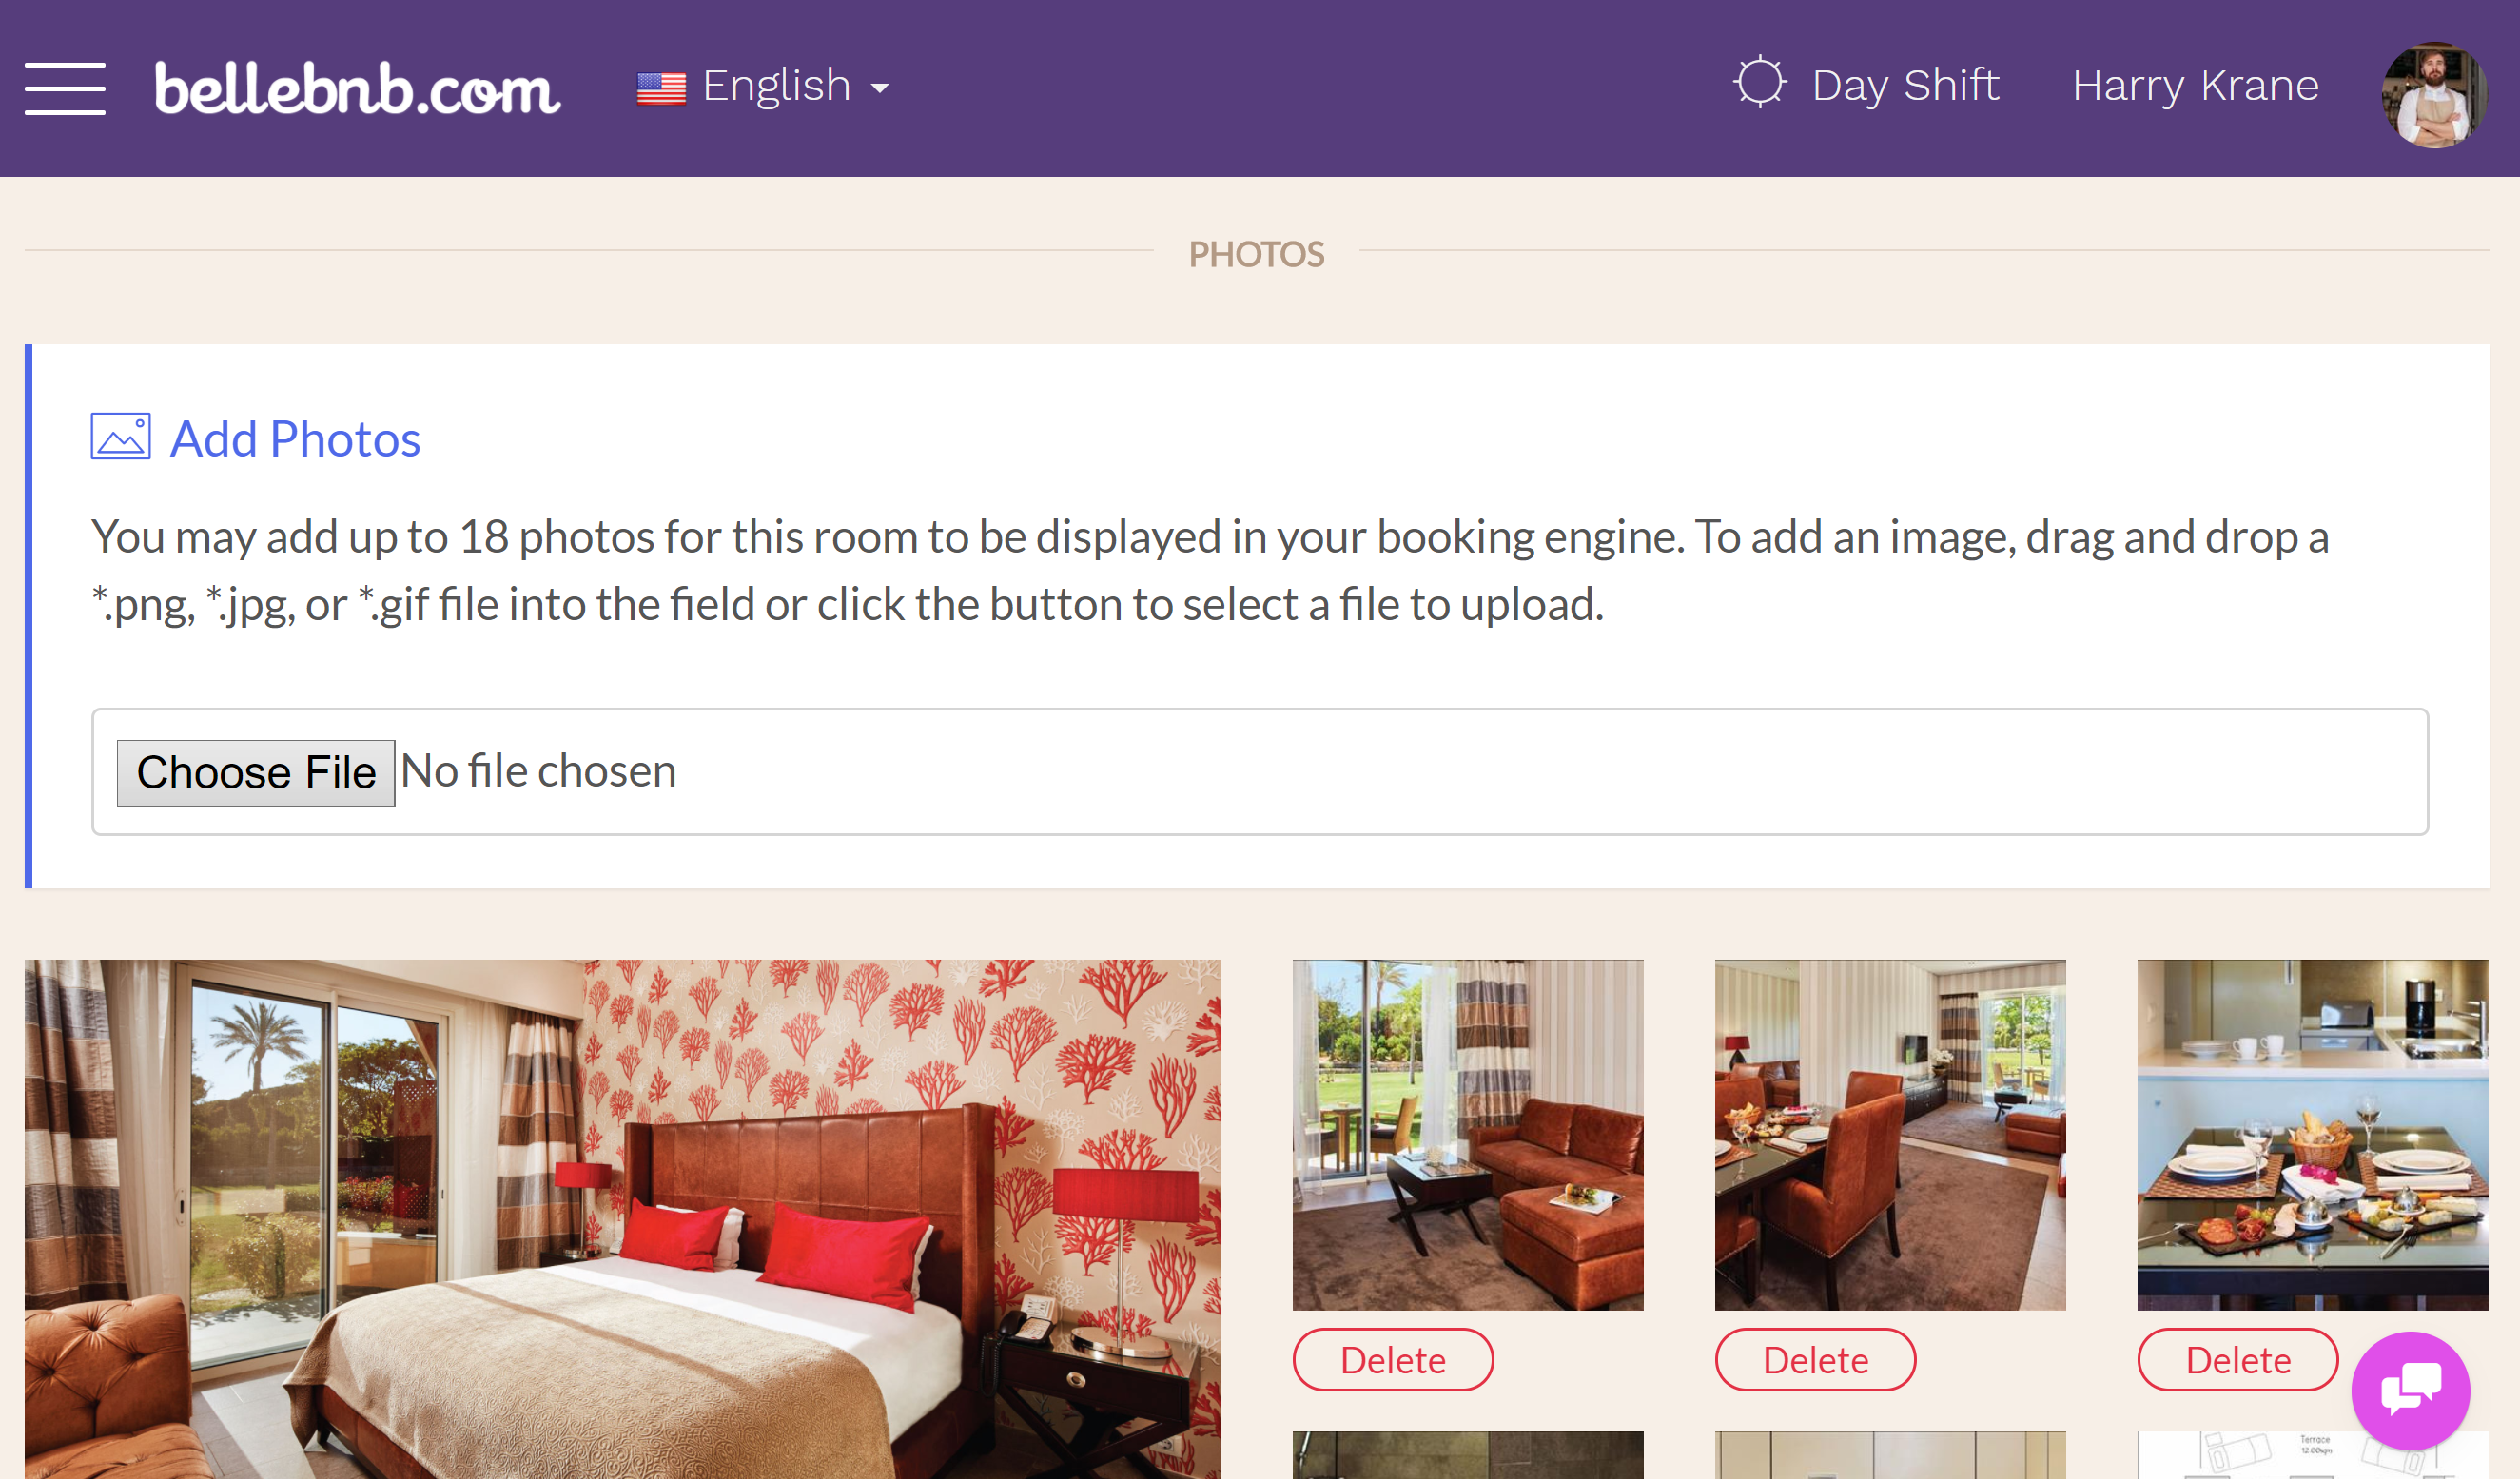 Add photos for your room types. Even more important than descriptions, guess want to see what their room will look like. You can add up to 25 photos for each room type, and you should add at leas 5 attractive photos to entice guests to book with you.